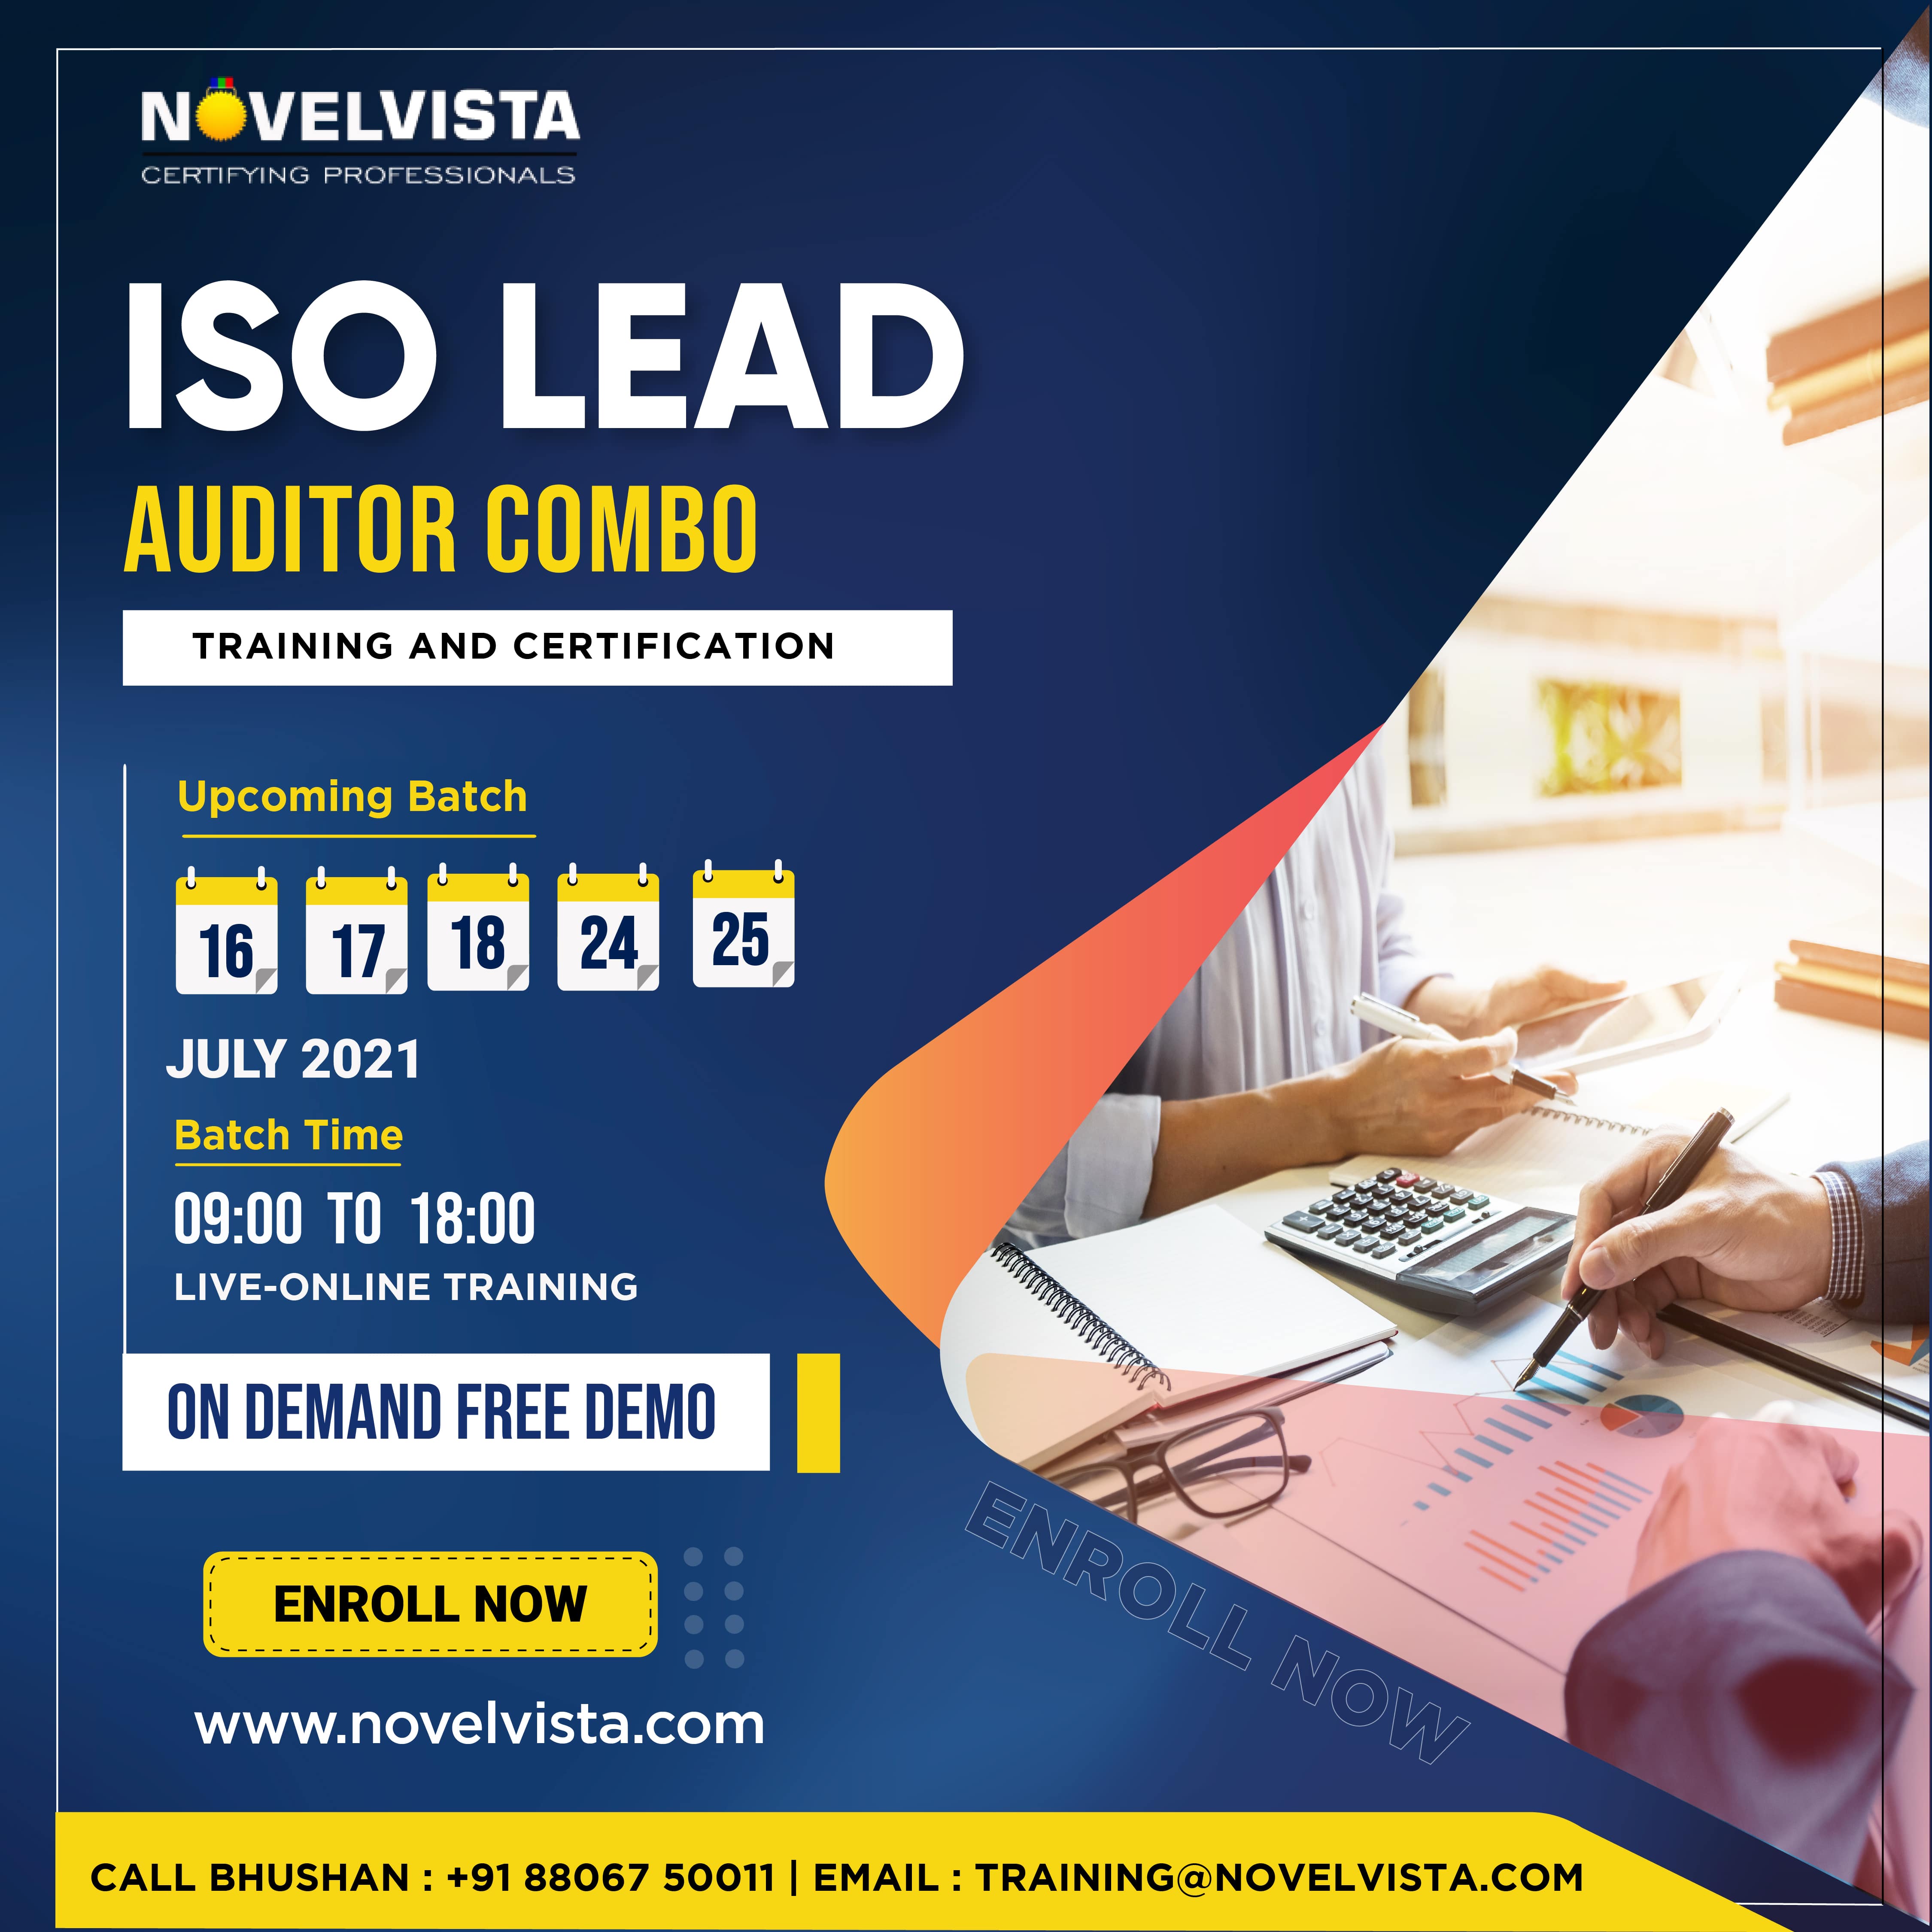 Join our ISO Lead Auditor Combo Certification Training, Chennai, Tamil Nadu, India